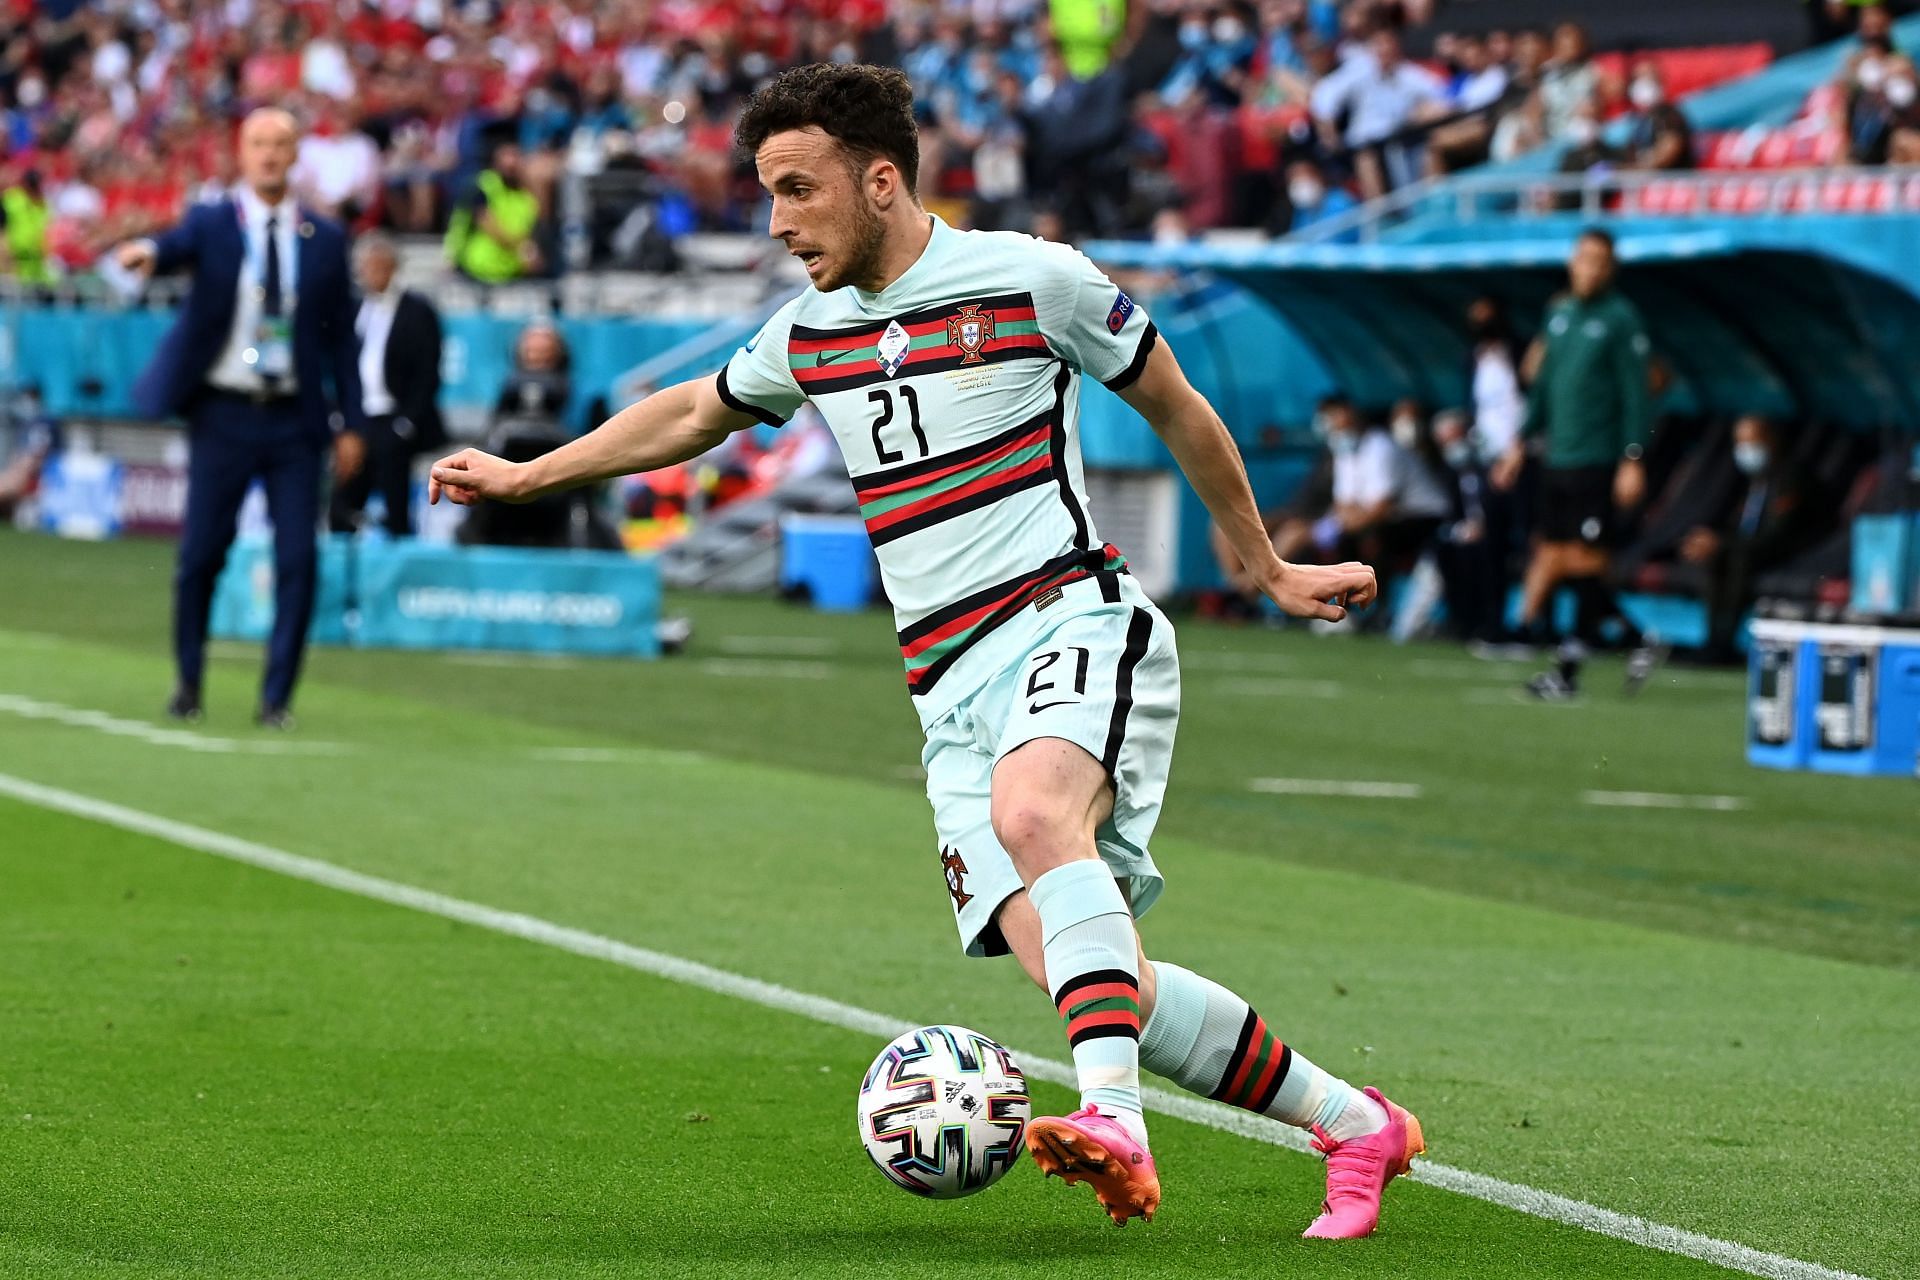 Diogo Jota (#21) in action at Euro 2020